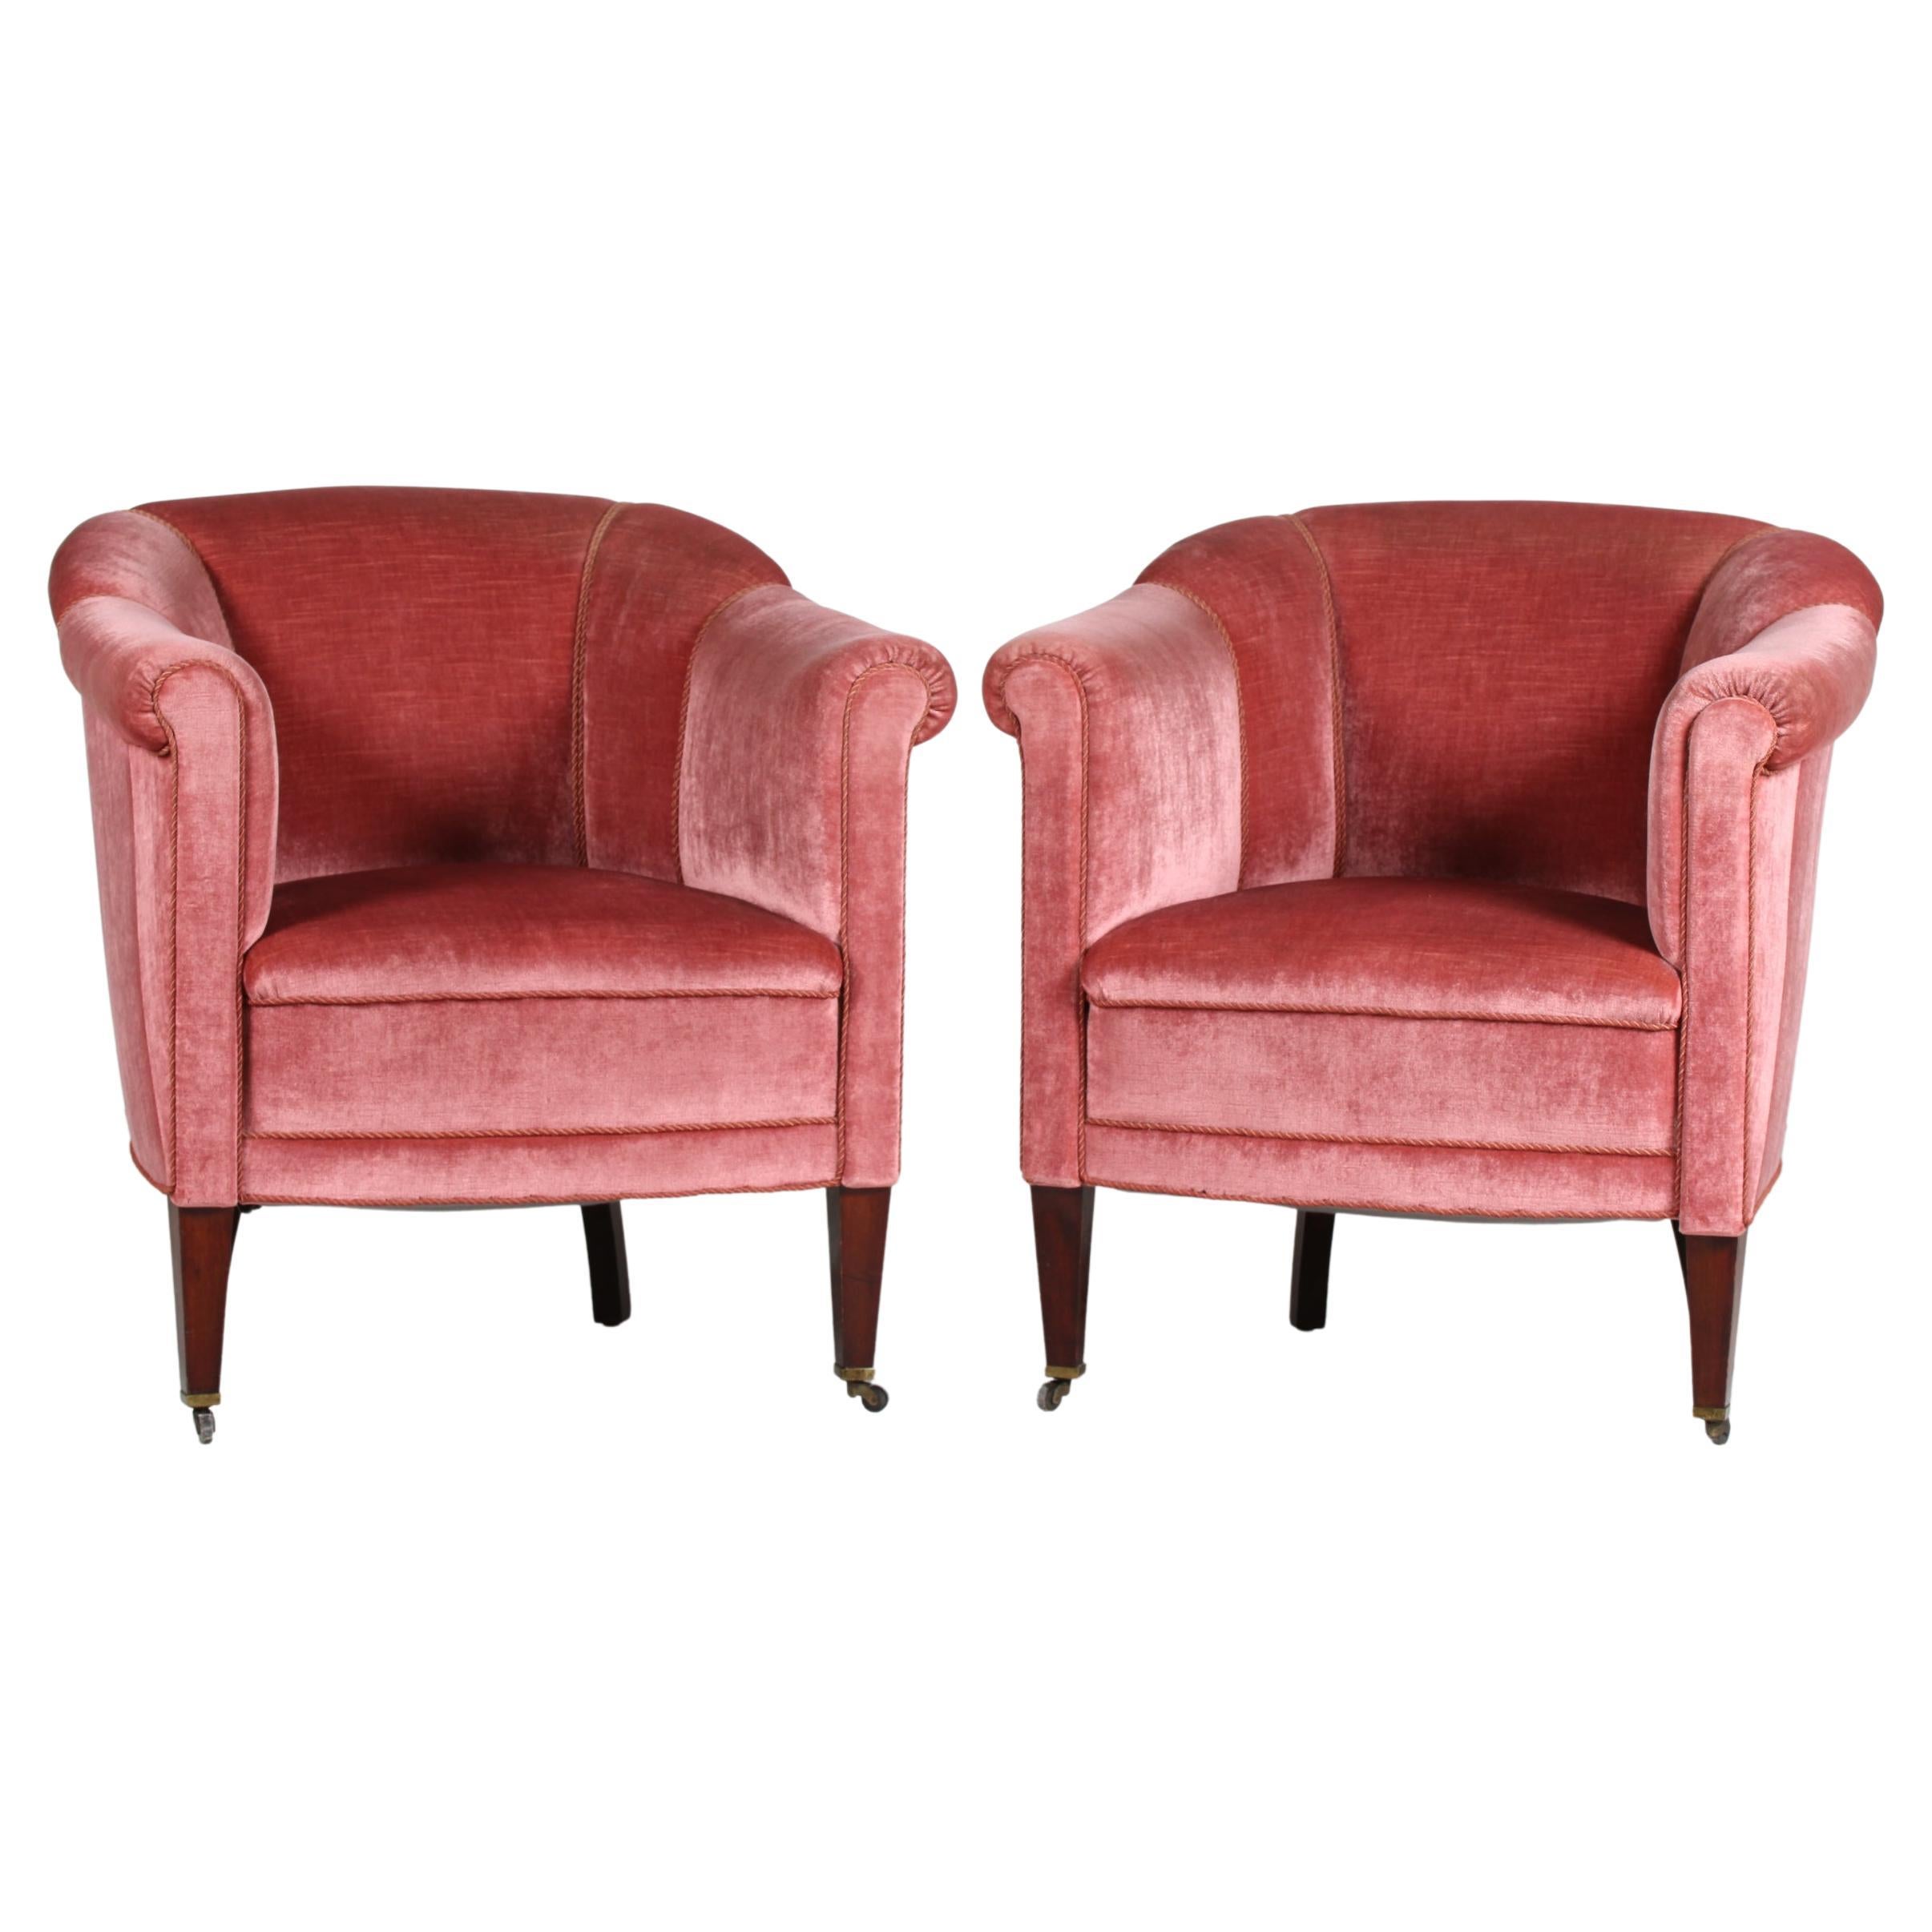 Pair of Old Danish Chesterfield Club Lounge Chairs Upholstered Pink Velvet 1920s